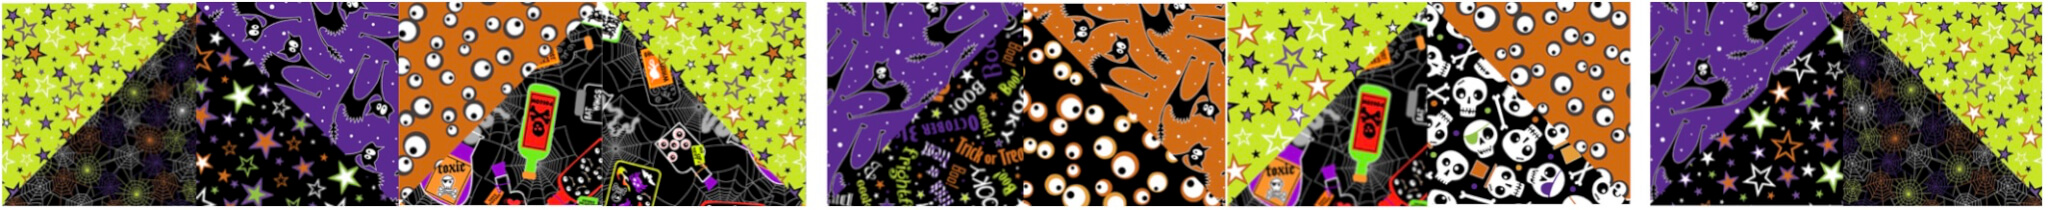 NEW! Sew A Celebration Halloween Half-Square Triangles Table Runner Sewing Tutorial